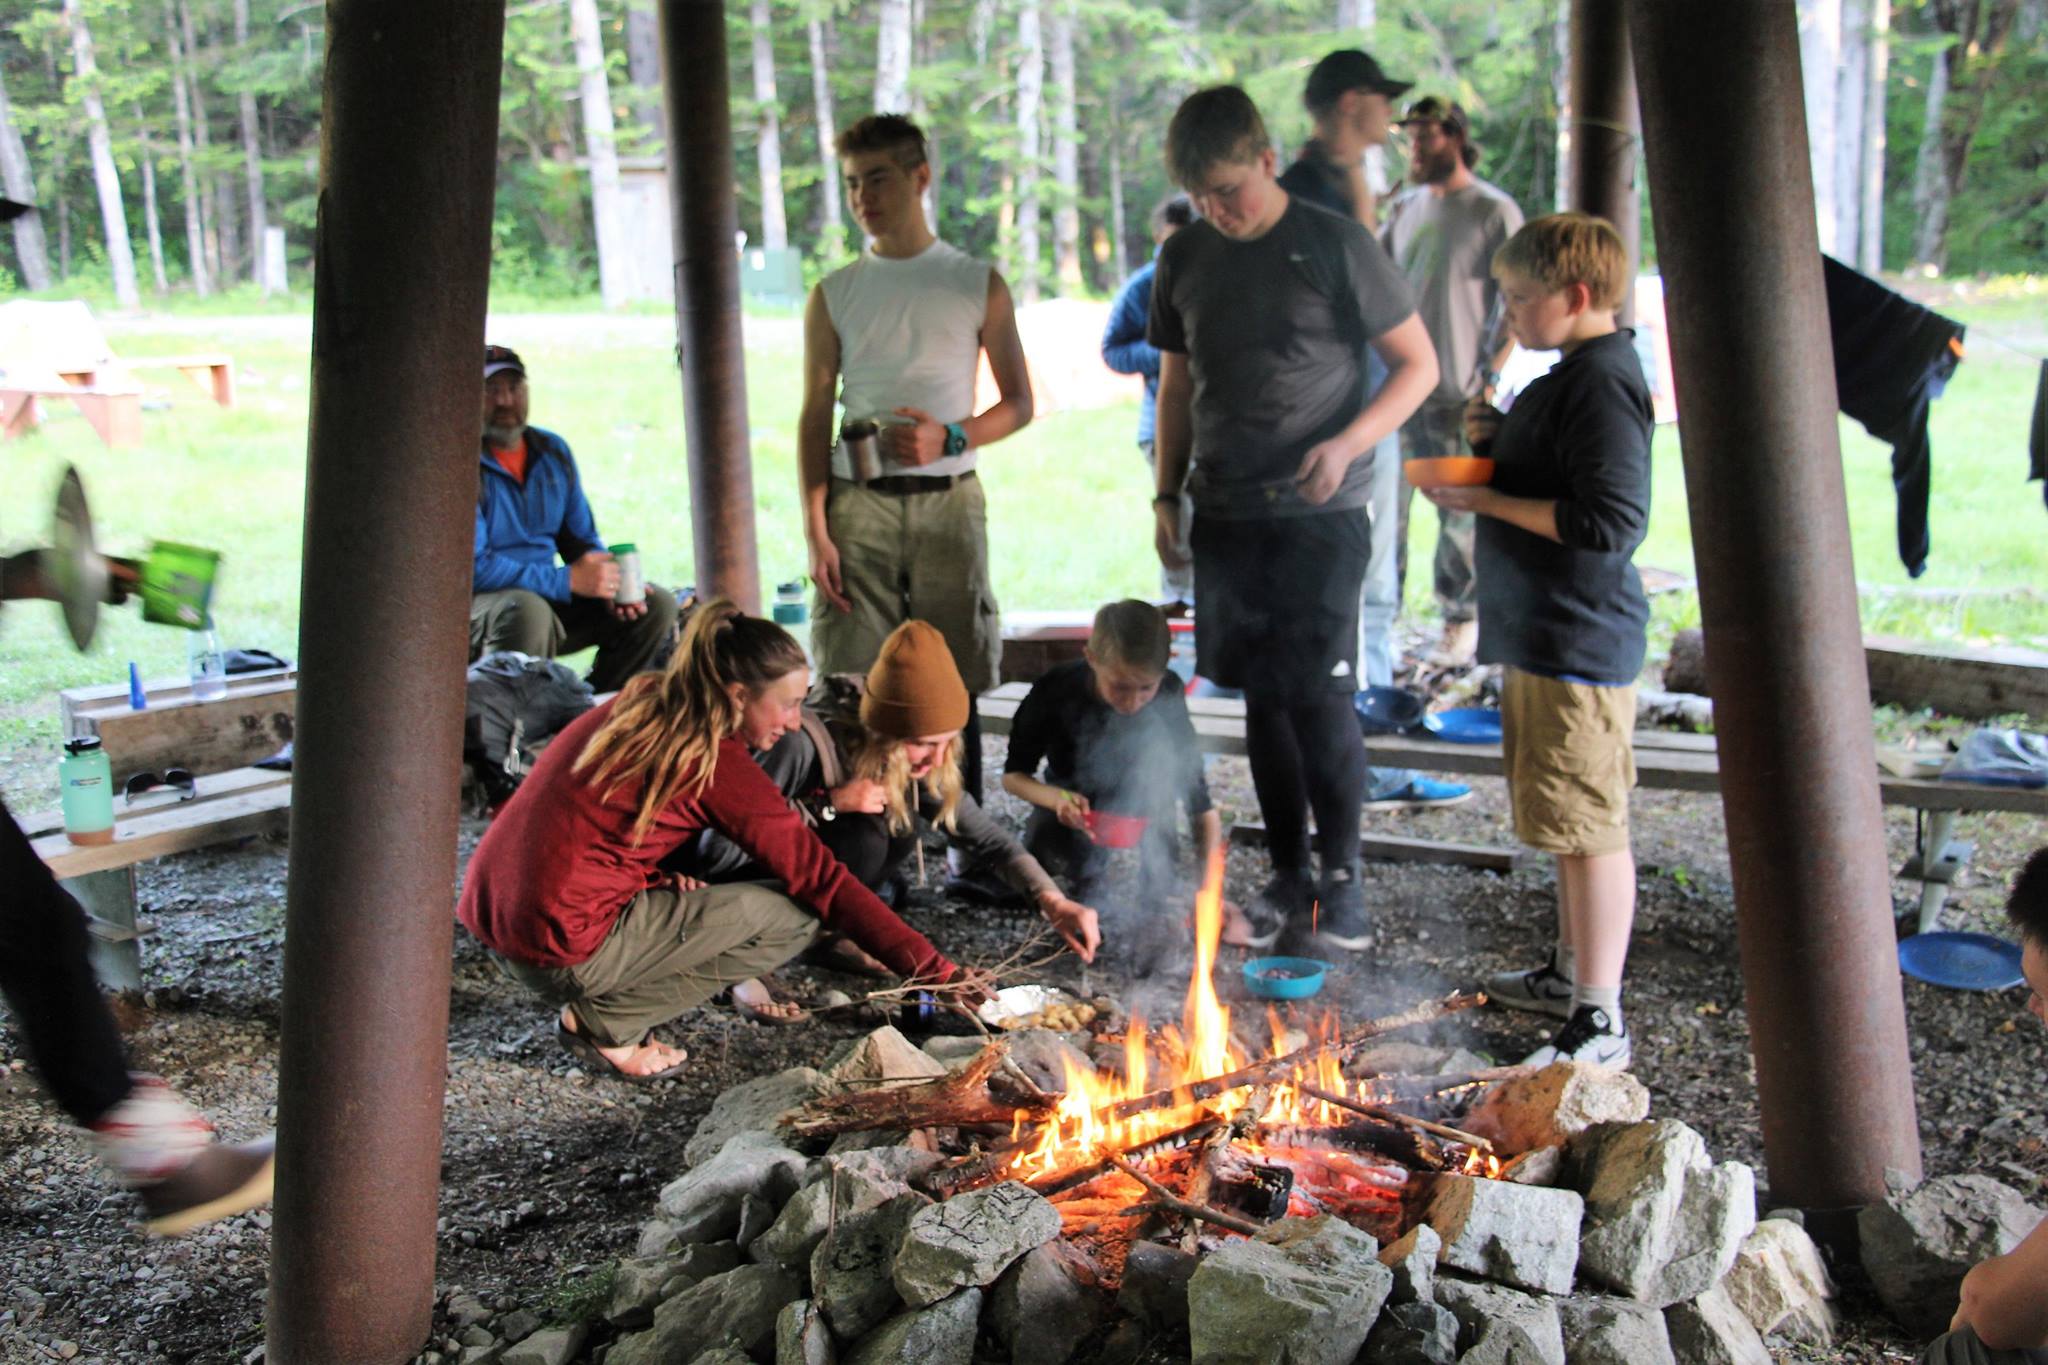 Scouts enjoy roasting smores on the adventure base's covered firepit